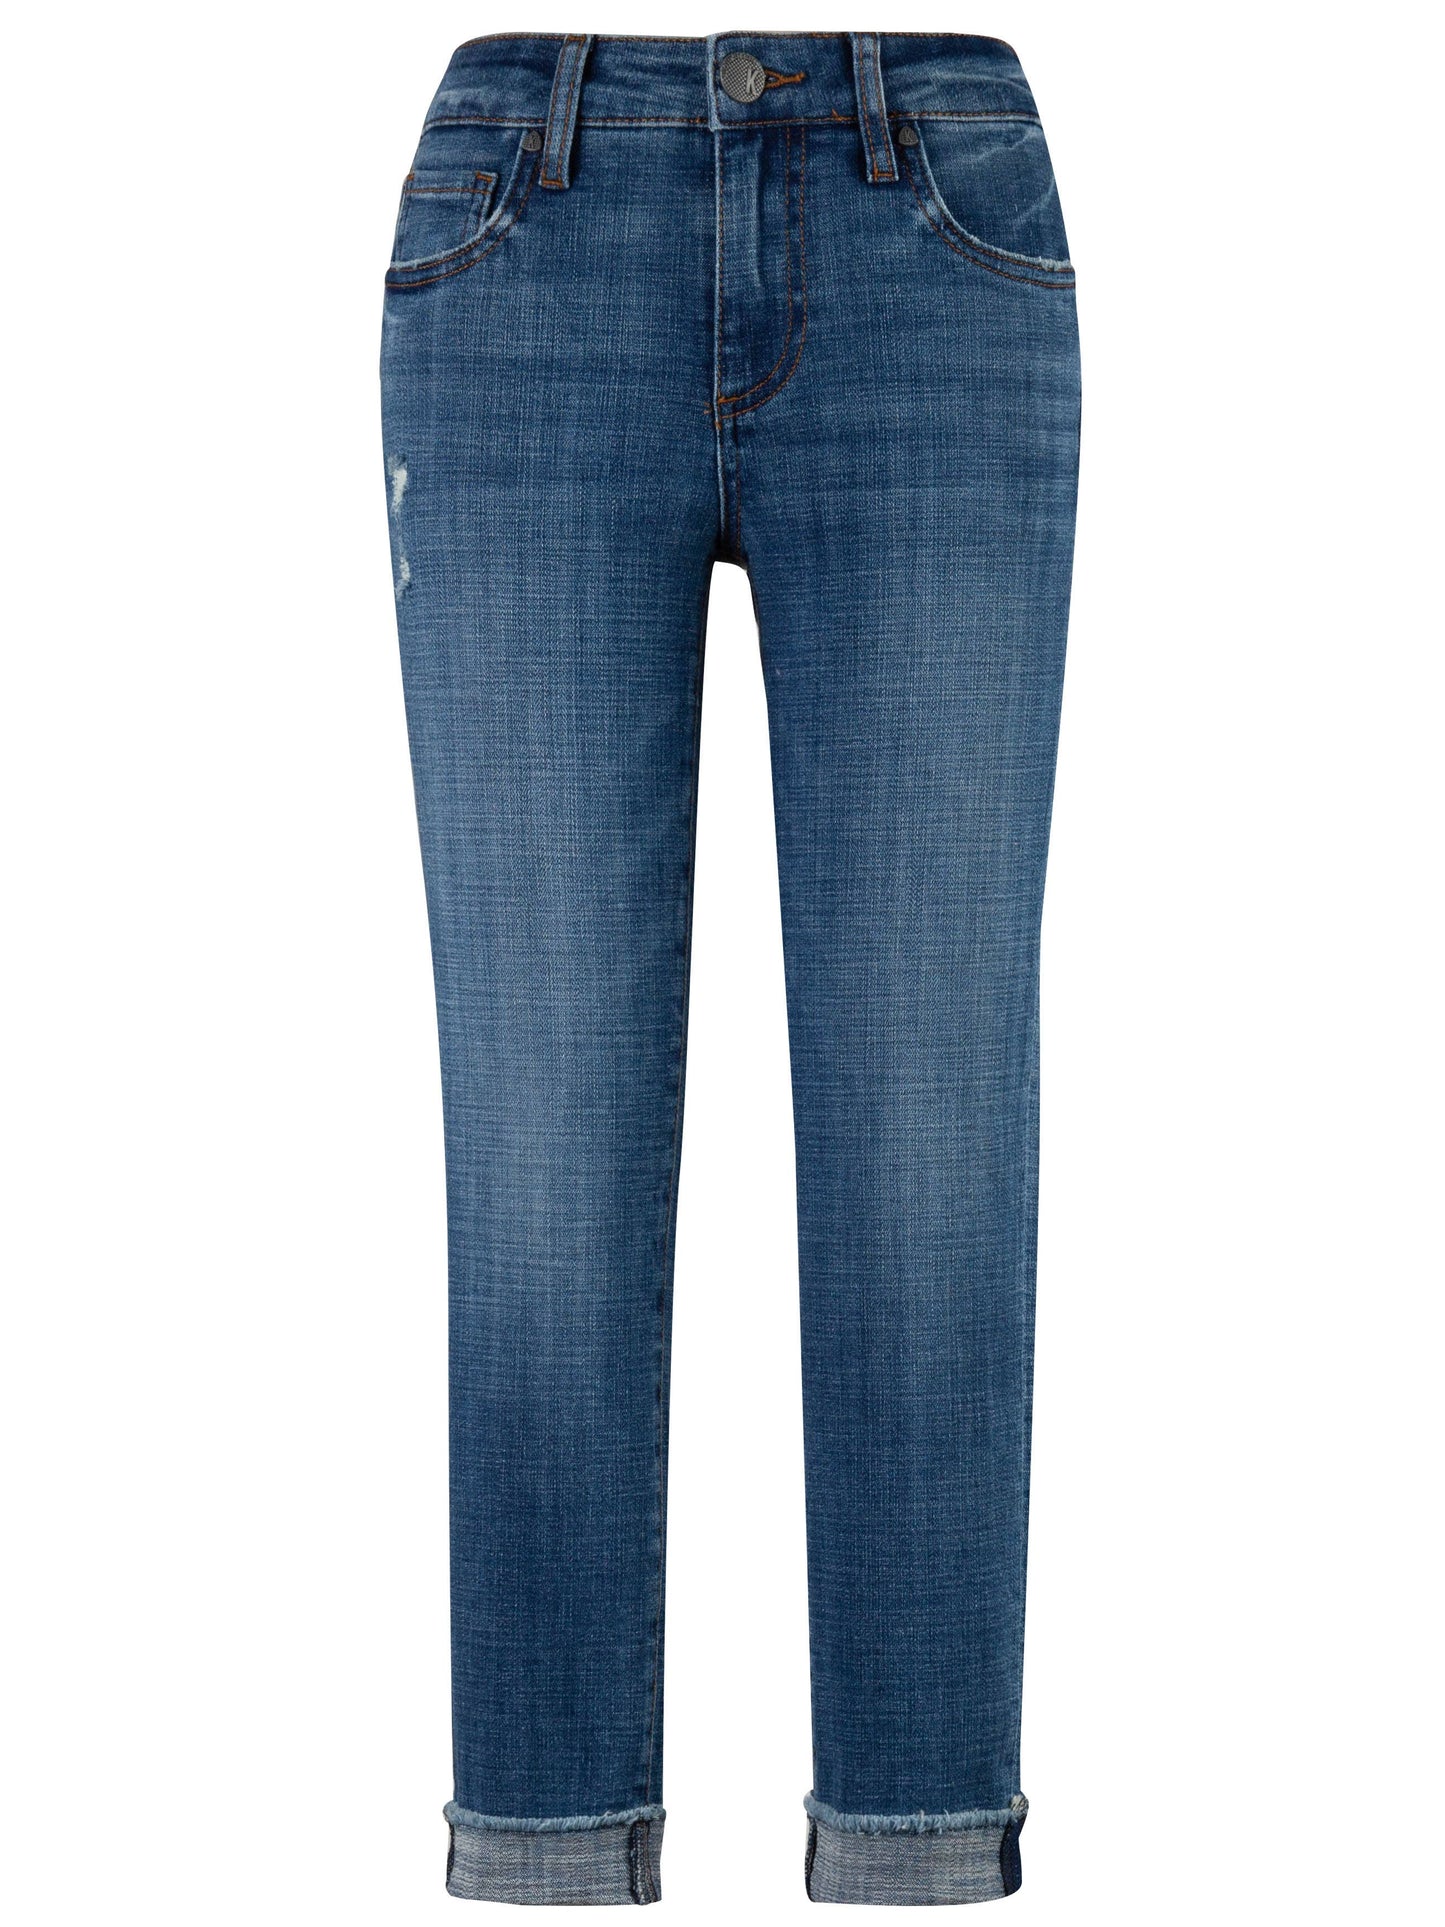 Kut from the Kloth - AMY CROP STRAIGHT LEG- ROLL UP FRAY